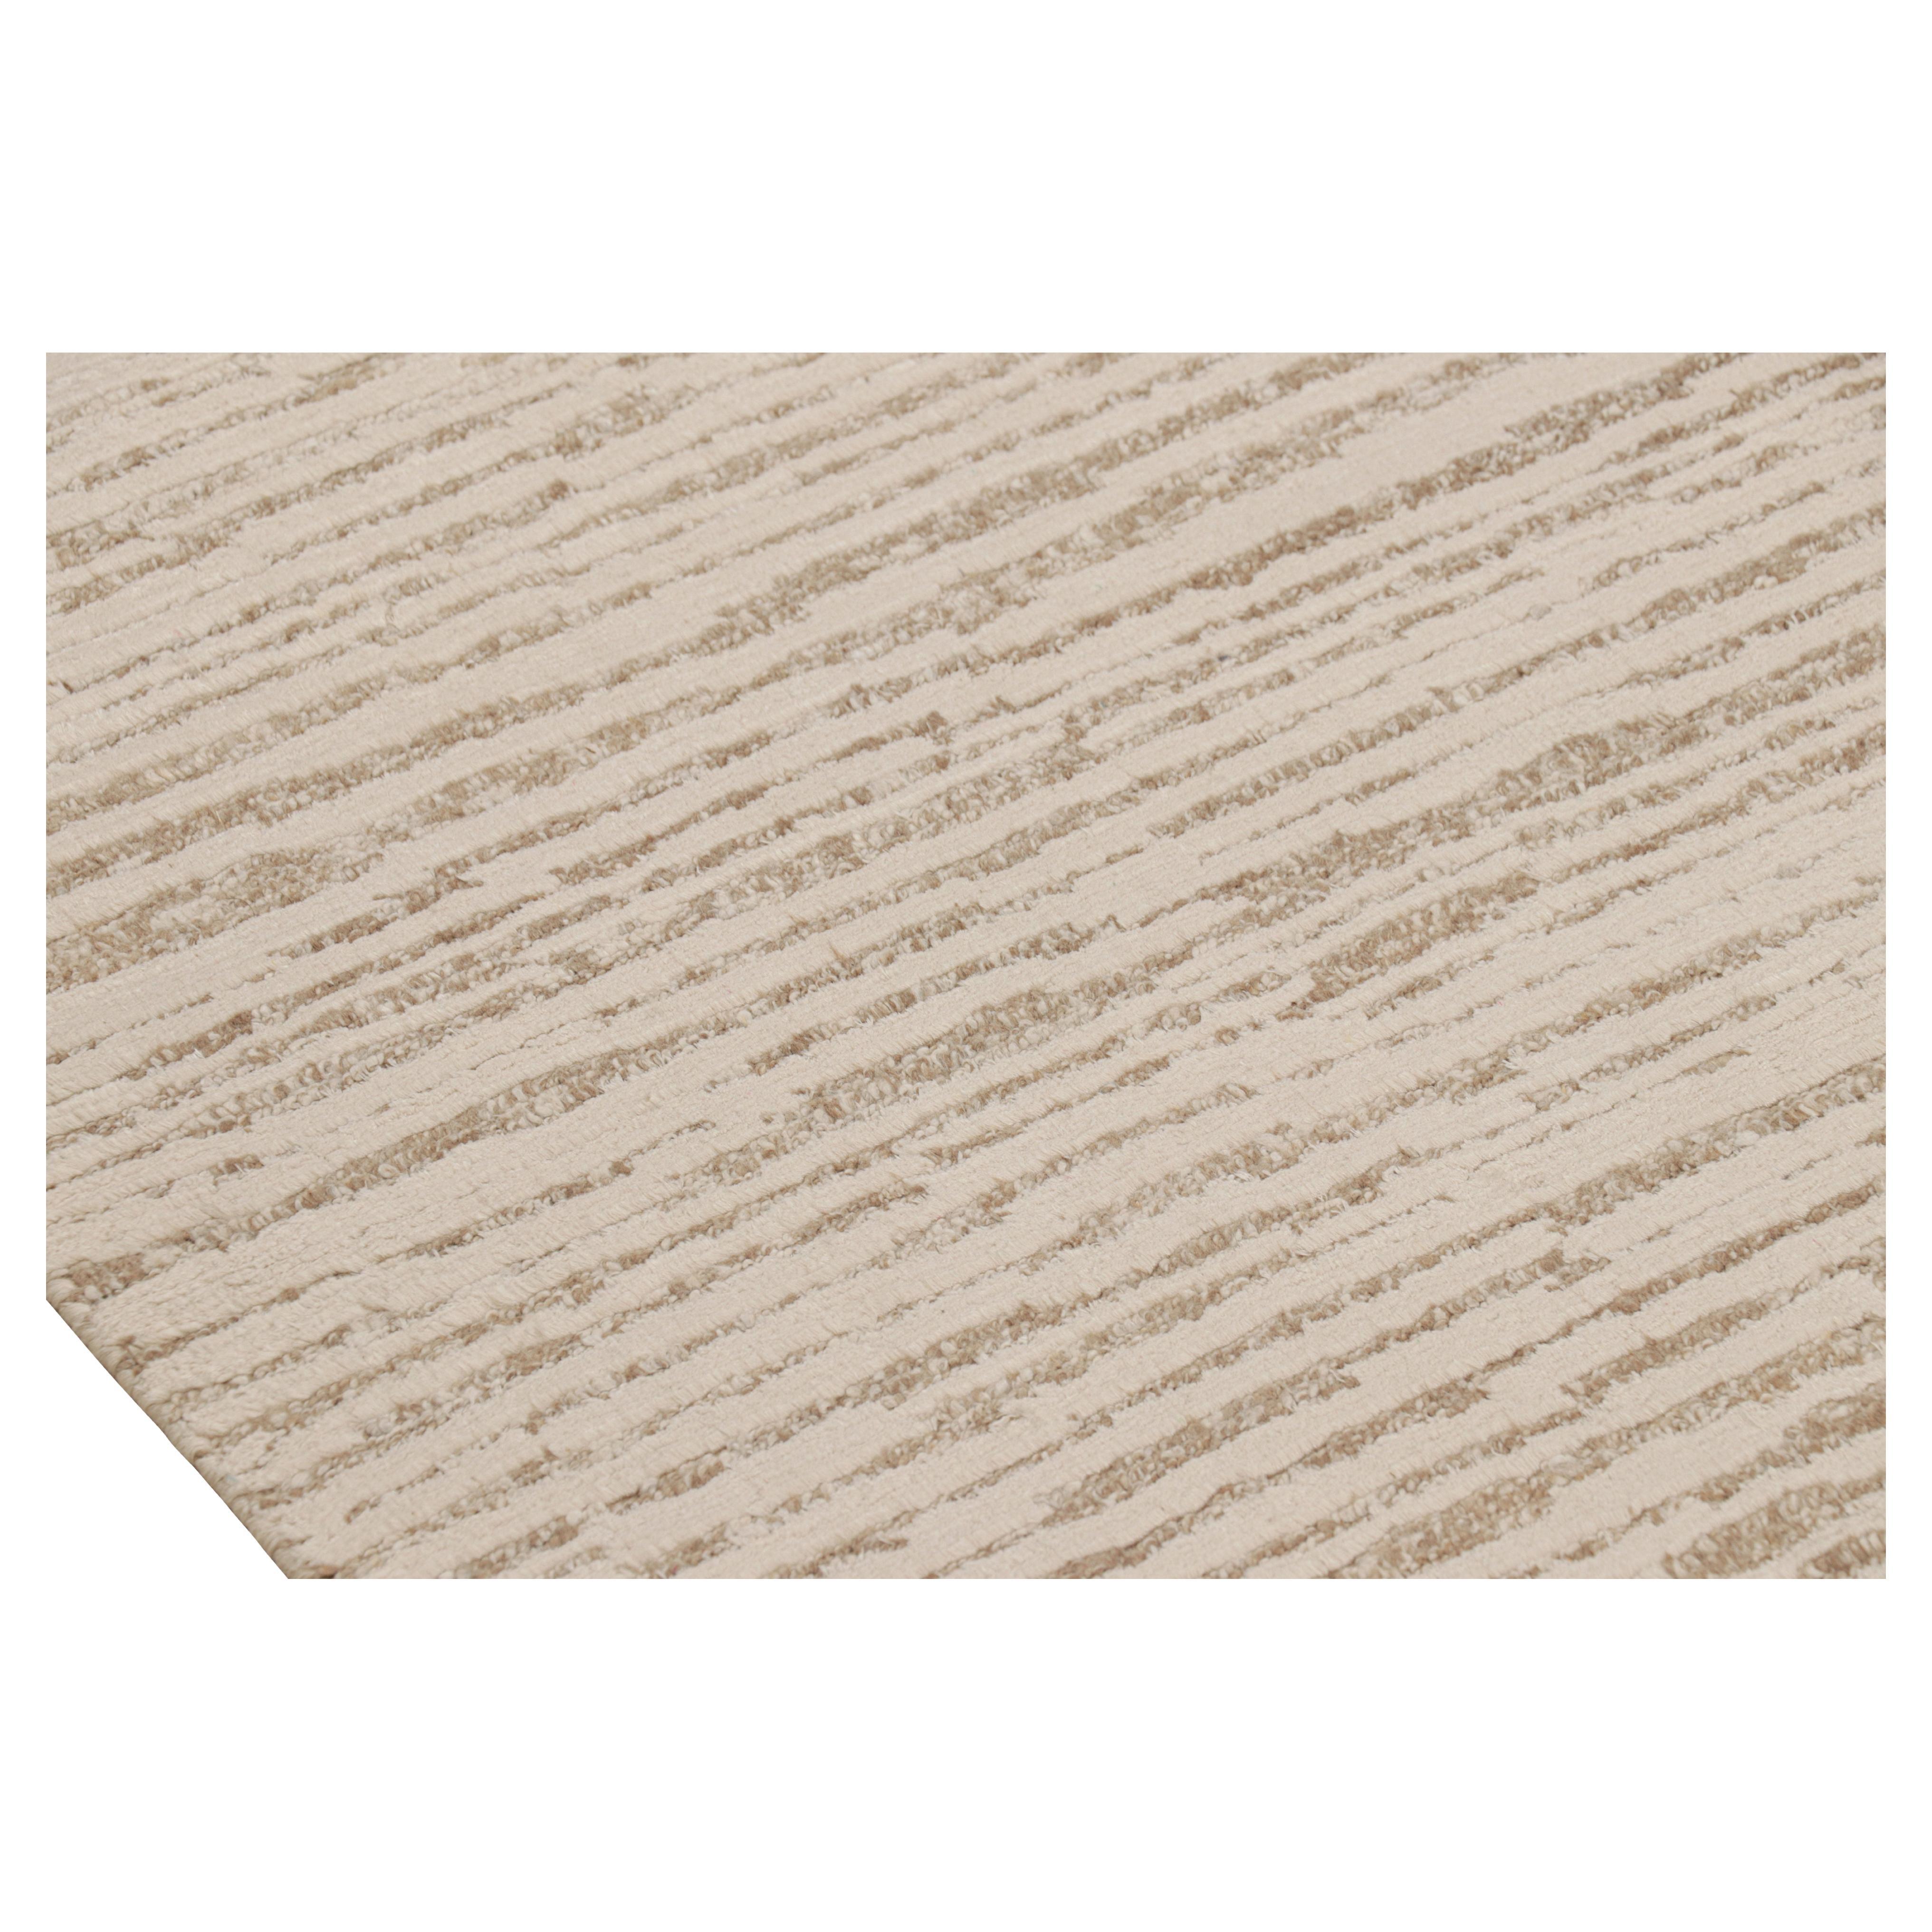 Rug & Kilim’s Contemporary Textural Rug with Beige and Cream White Tones